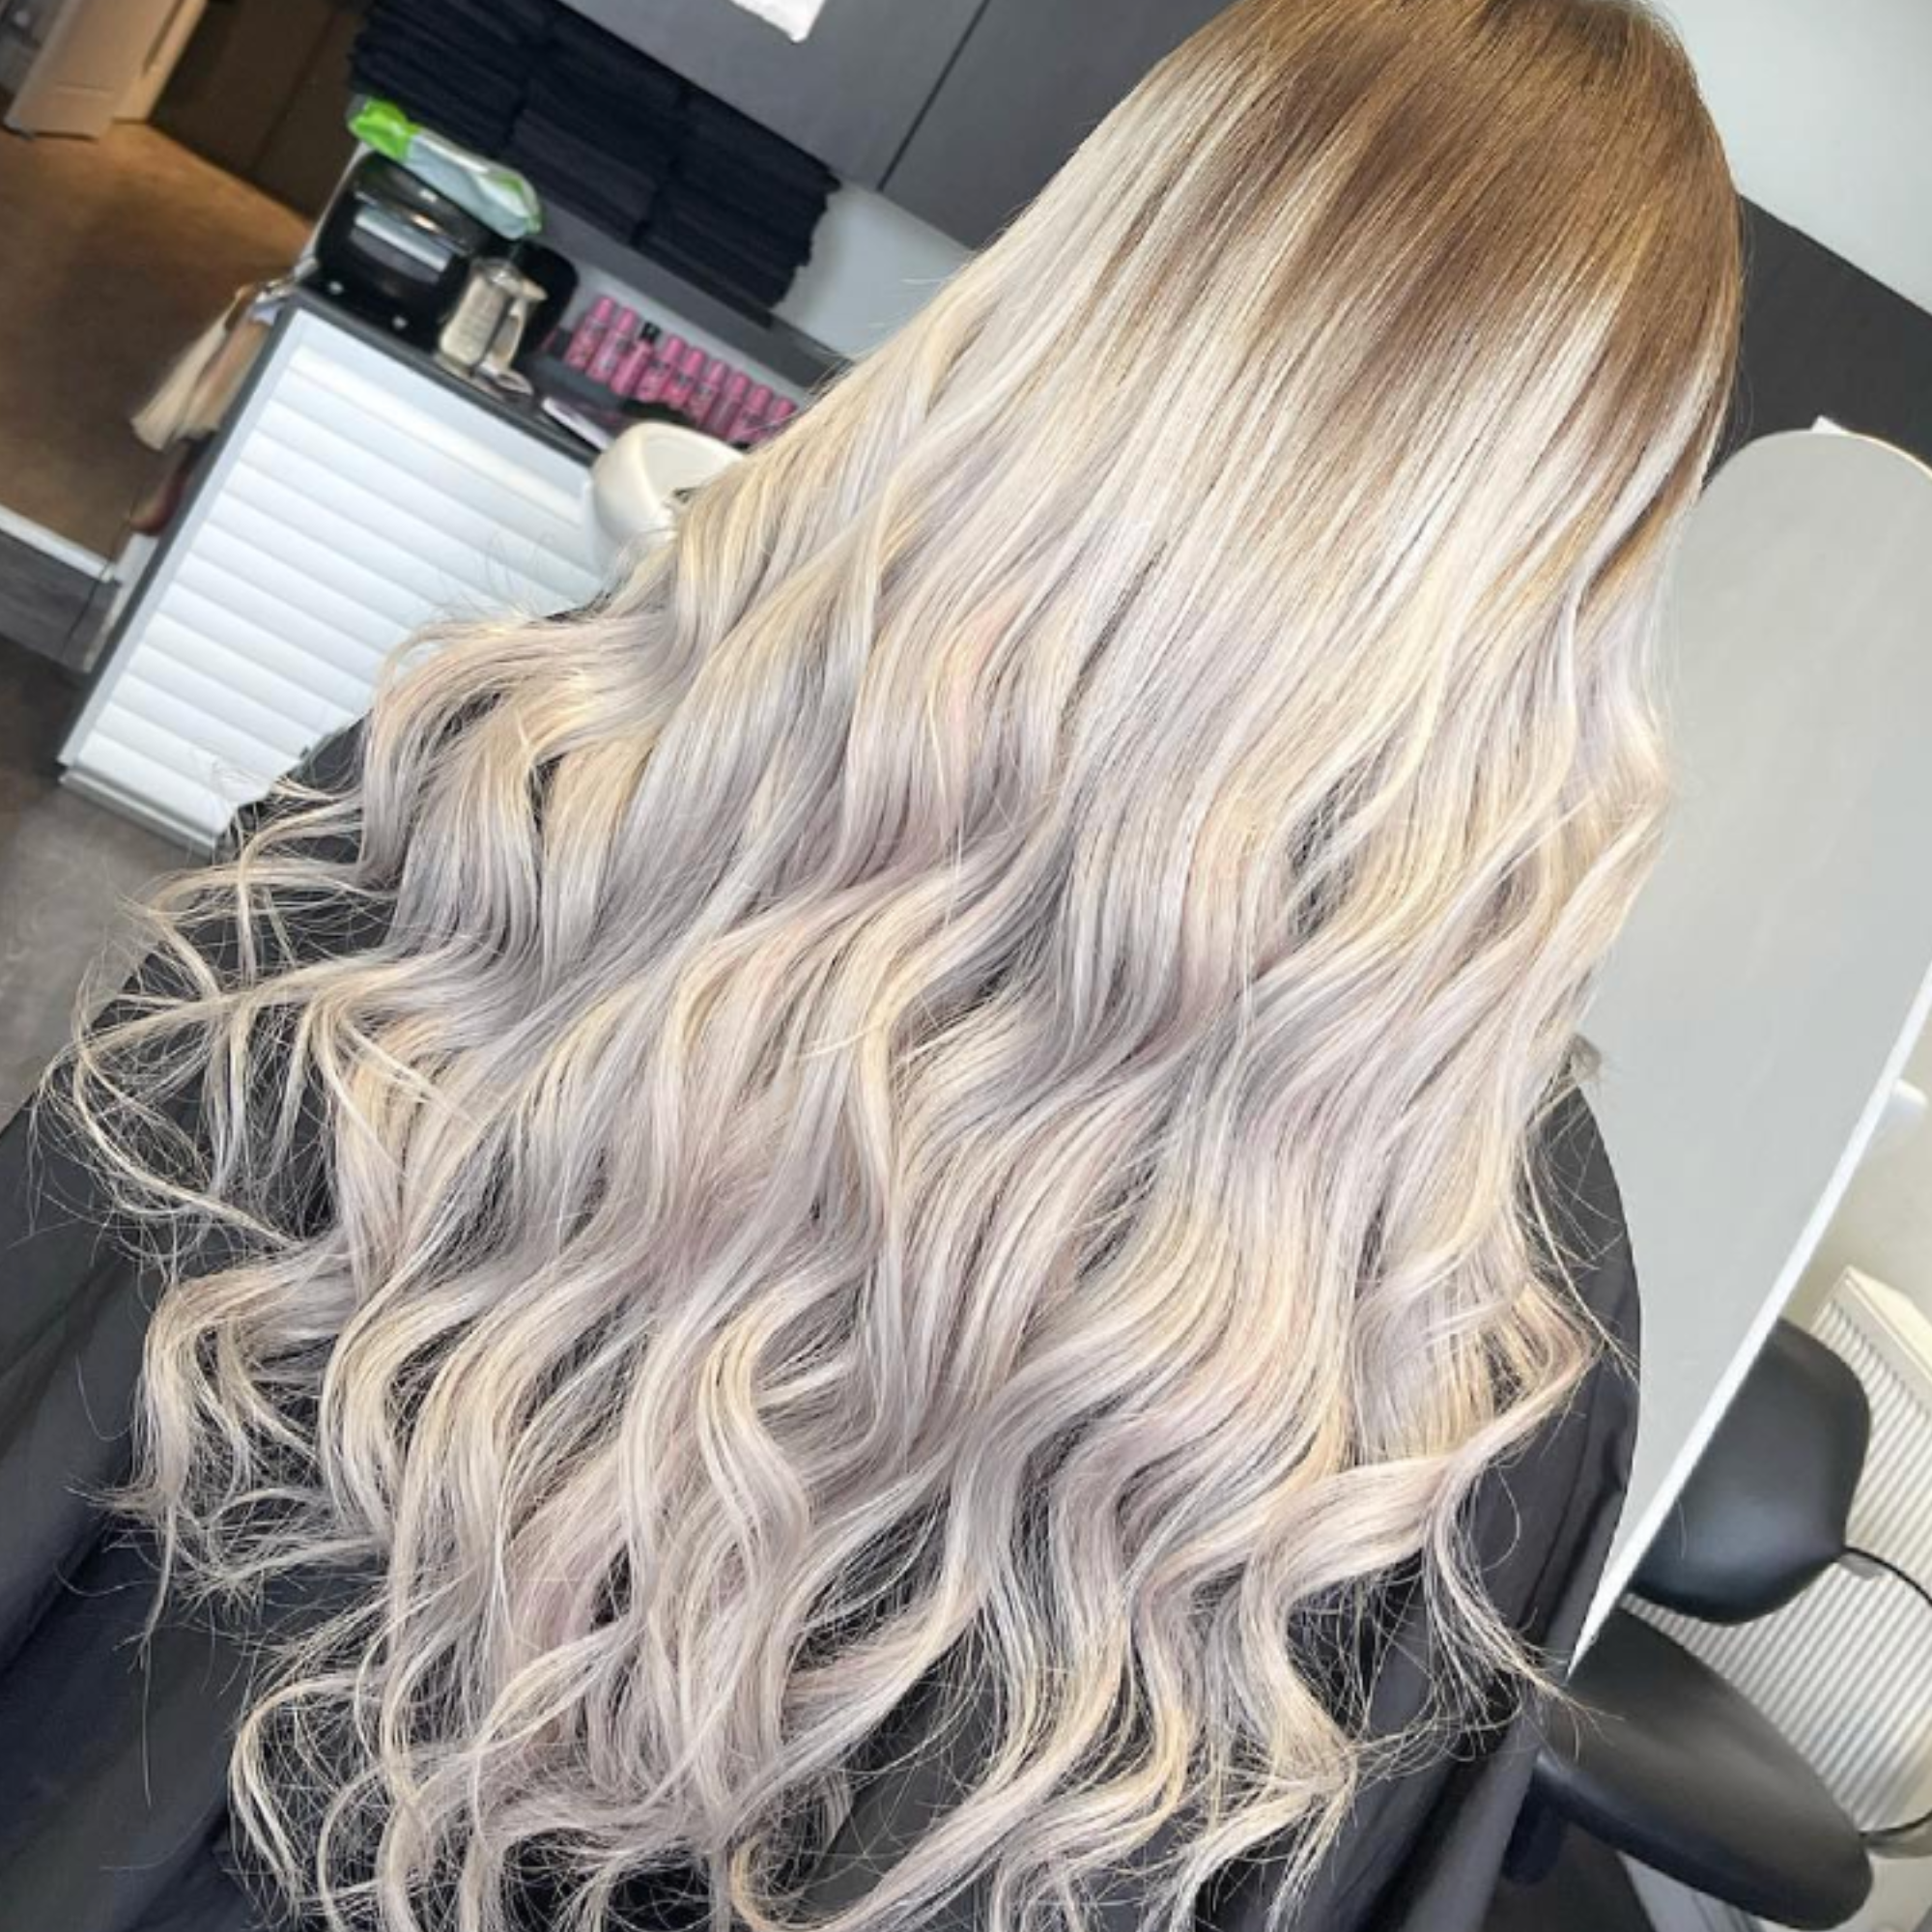 "customer wearing hair rehab london 22" weft hair extensions shade rooted blonde af"